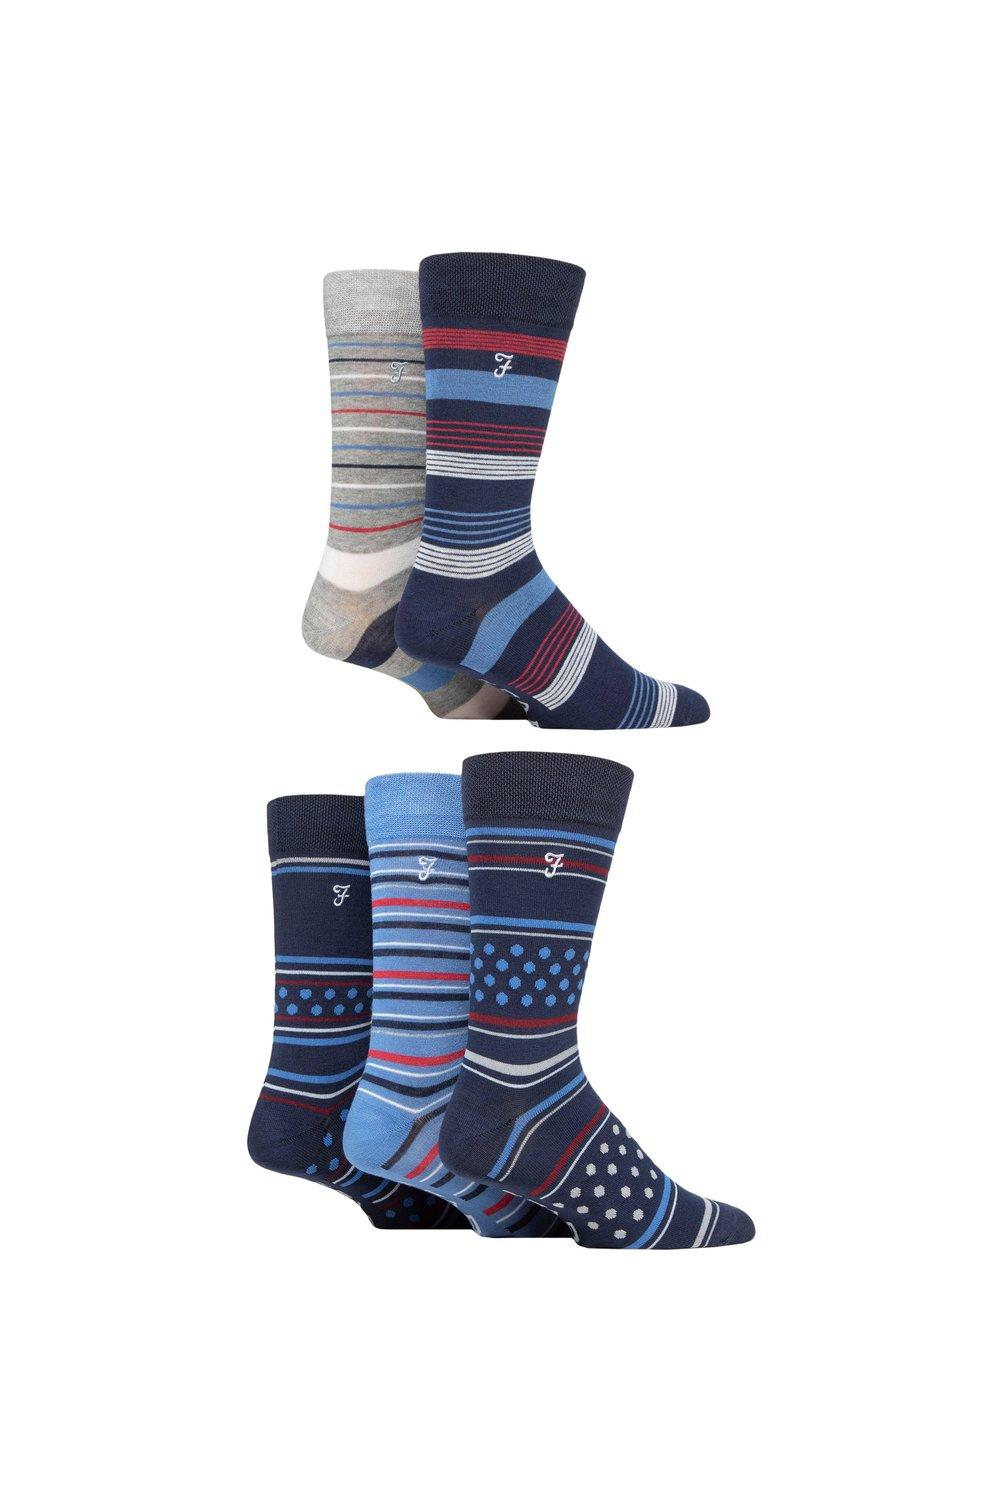 Mens 5 Pair Farah Plain, Striped and Patterned Everyday Bamboo Socks